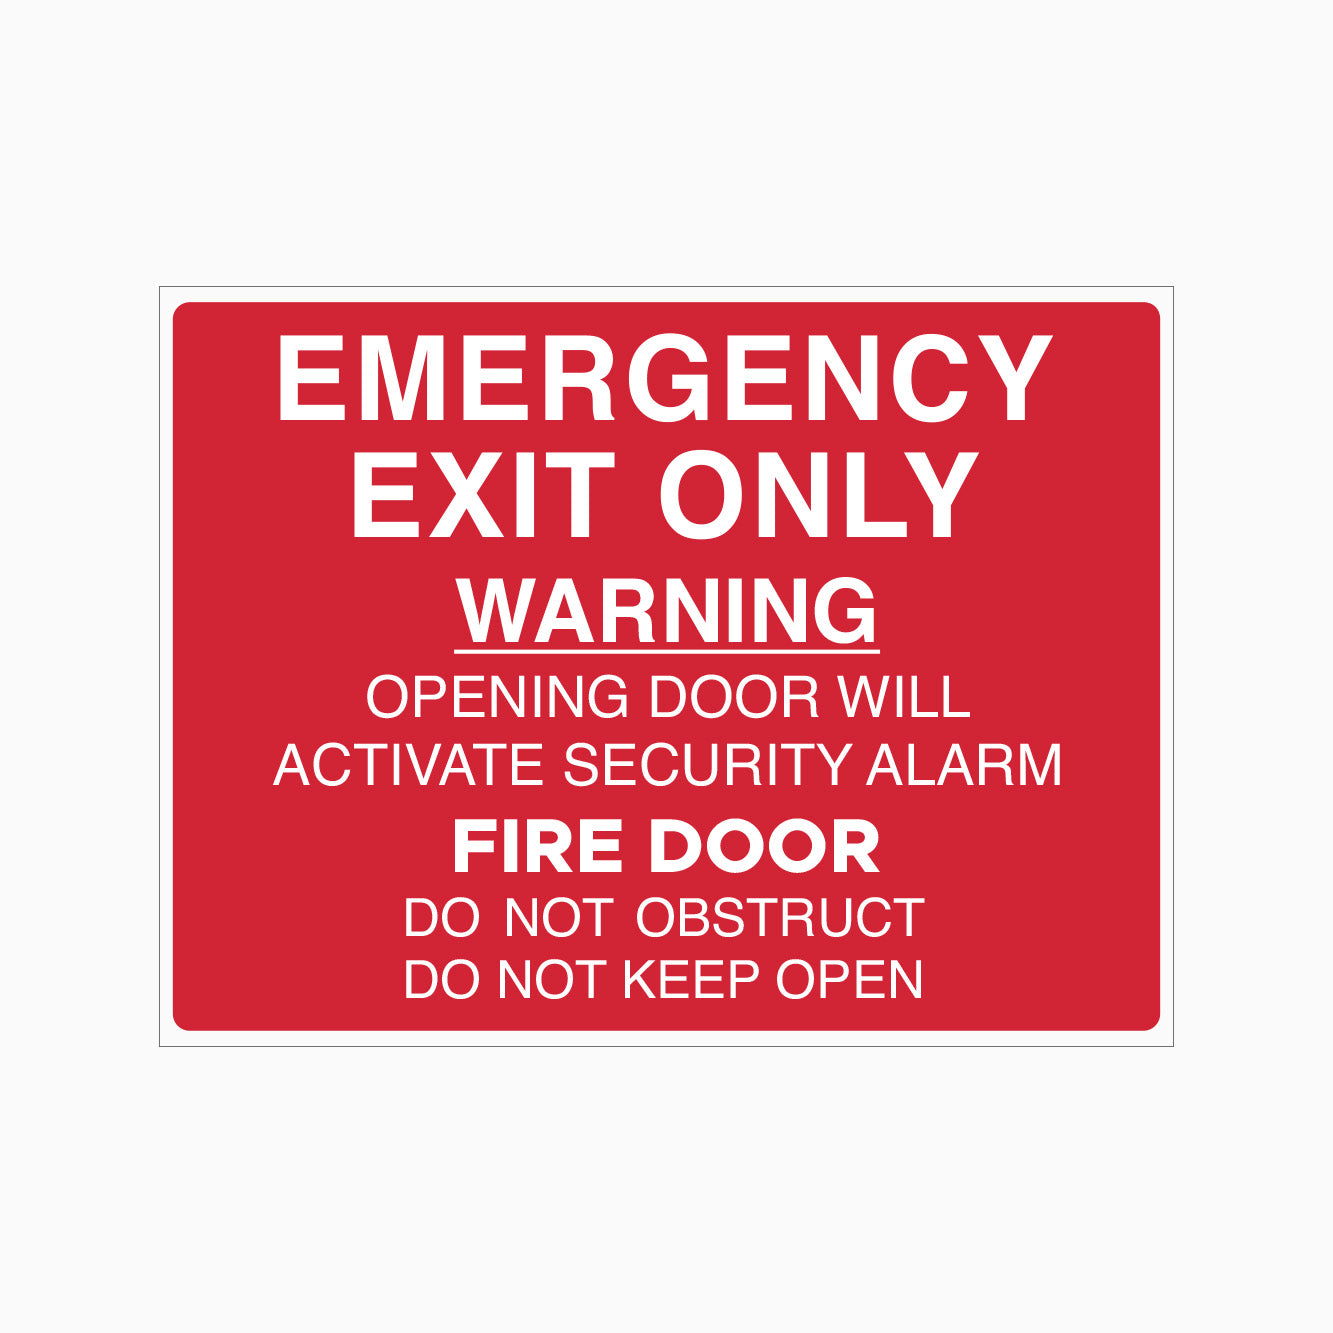 EMERGENCY EXIT ONLY SIGN - WARNING SIGN - OPENING DOOR WILL ACTIVATE SECURITY ALARM SIGN - FIRE DOOR SIGN - DO NOT OBSTRUCT SIGN - DO NOT KEEP OPEN SIGN